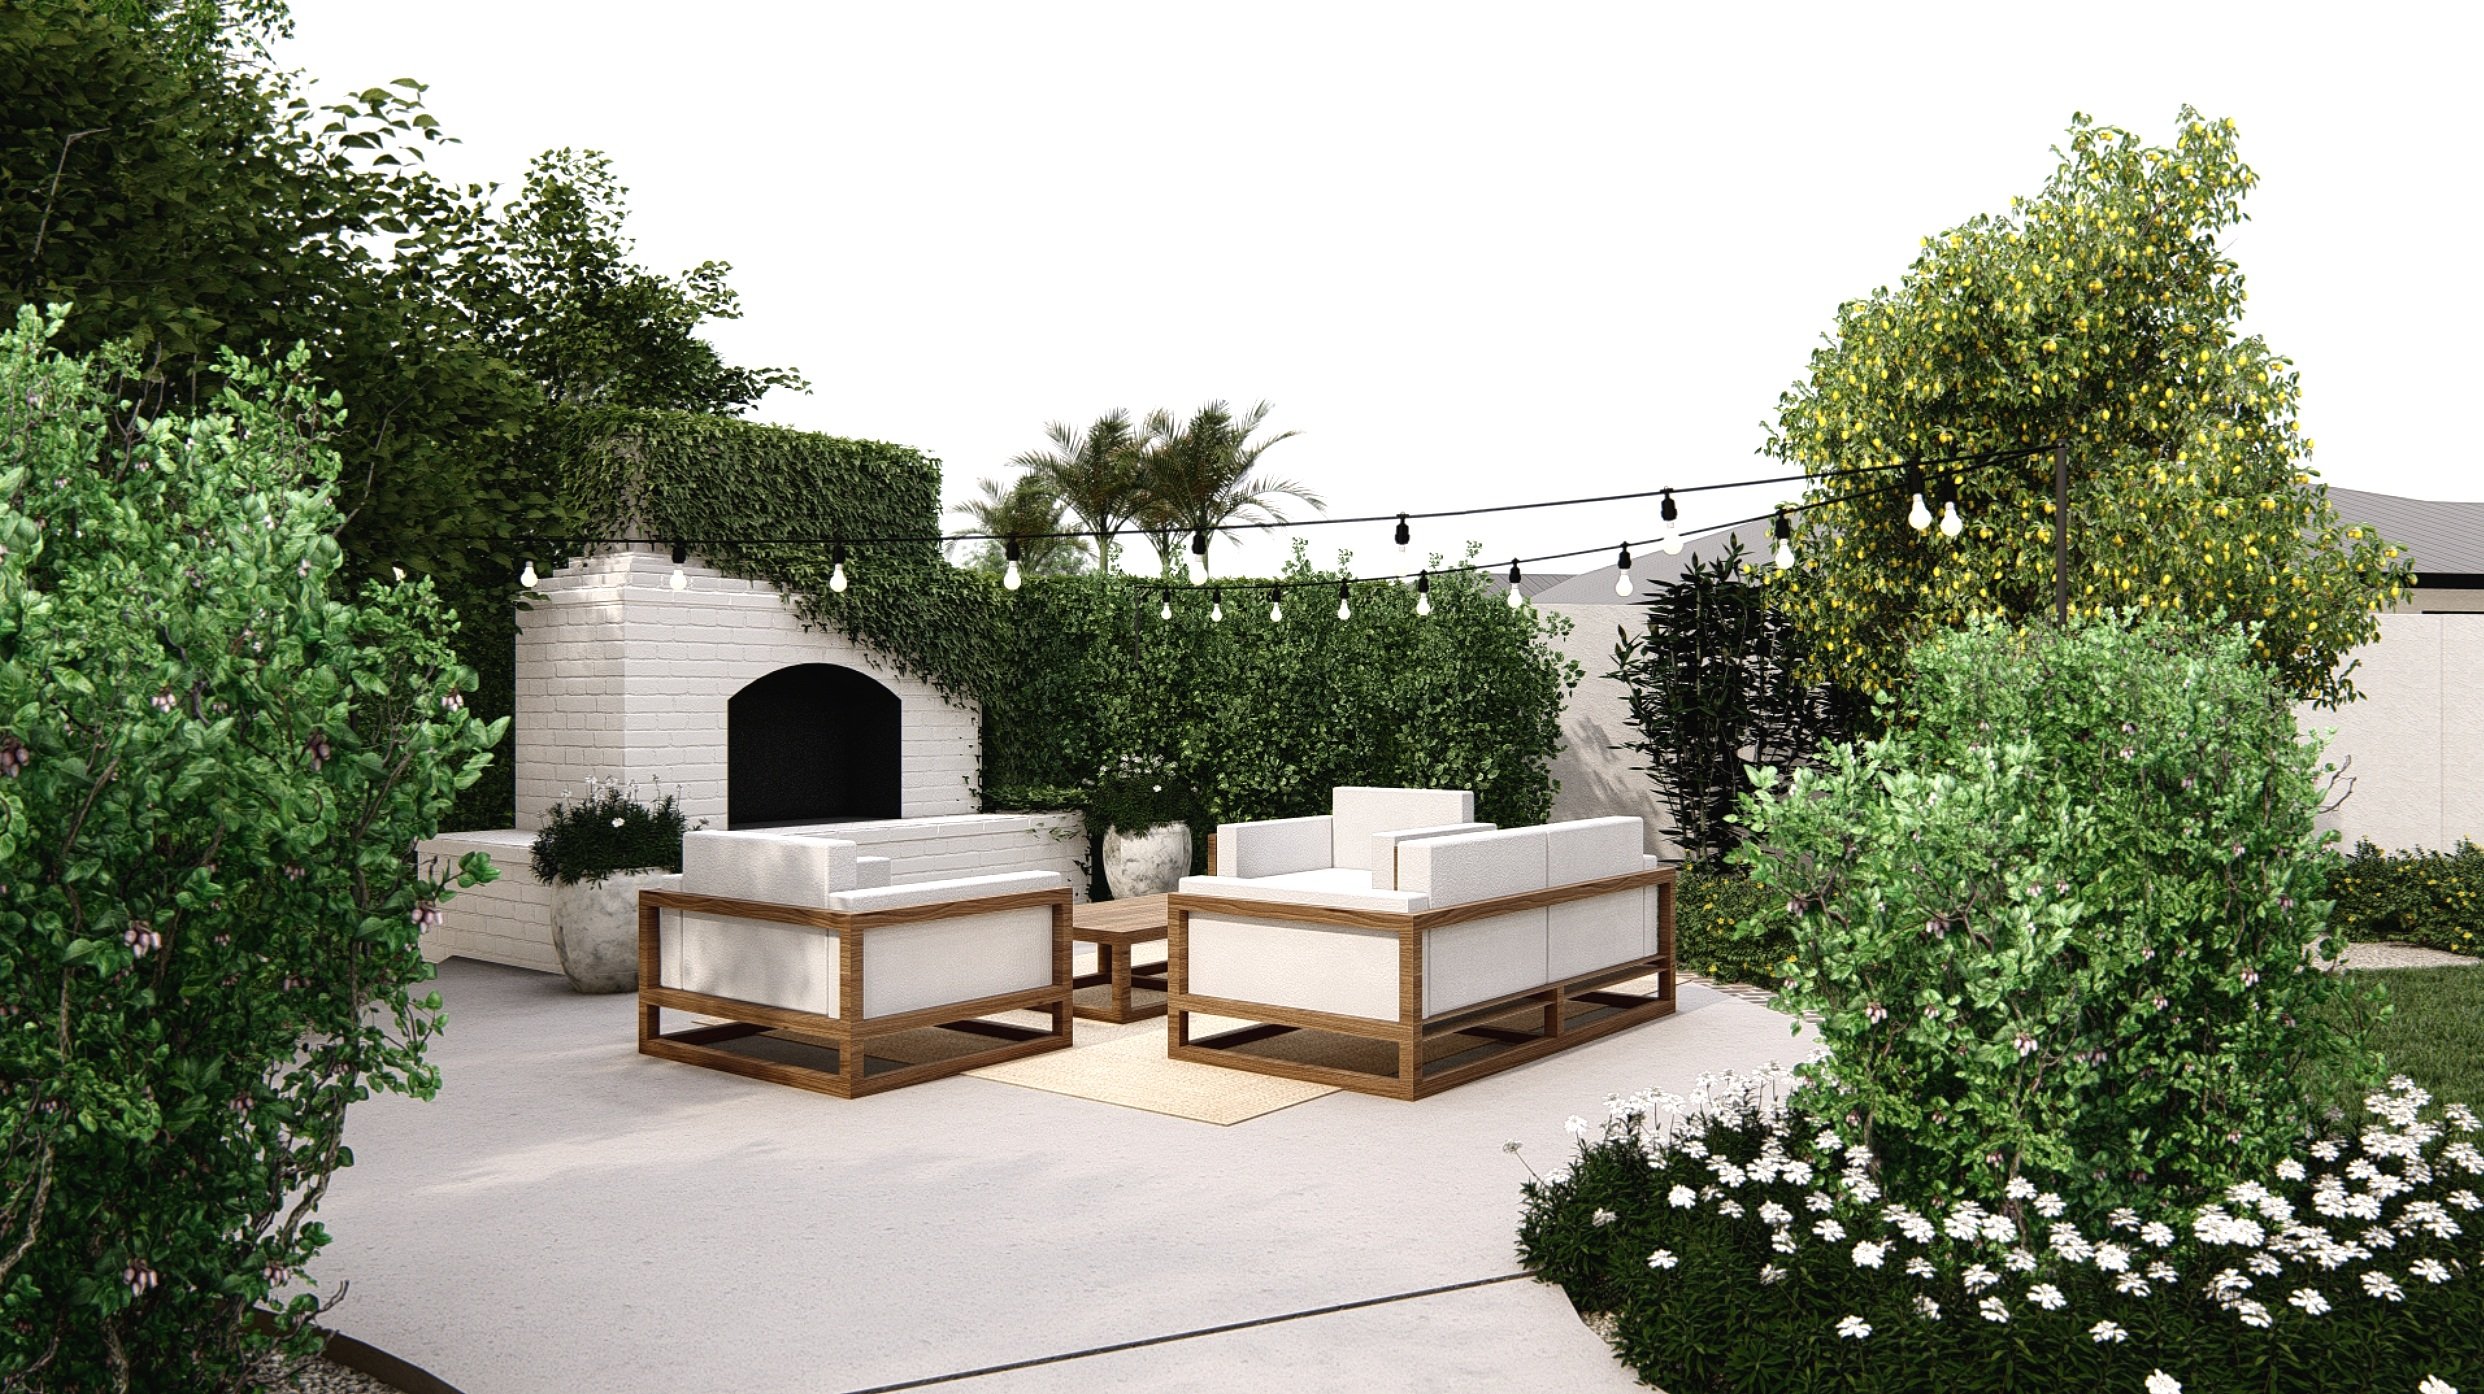 Fenced backyard with a sitting area, a fire place and outdoor lights hanging over with some flowers